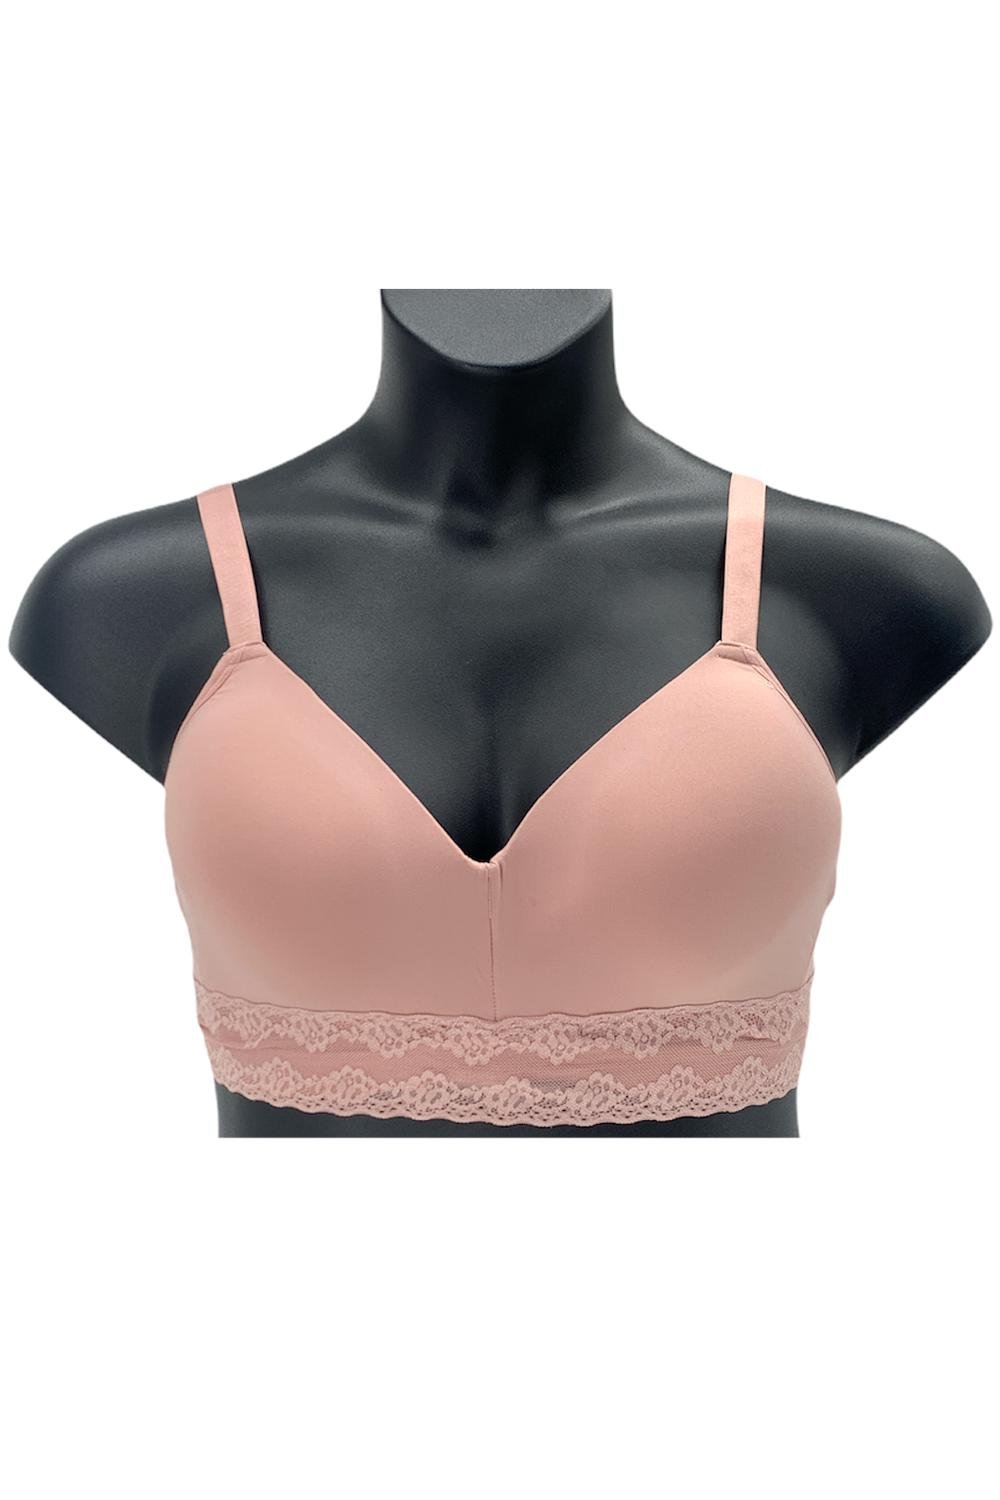 Breezies Seamless Long Line Wirefree Contour Bra Lace Band Rose